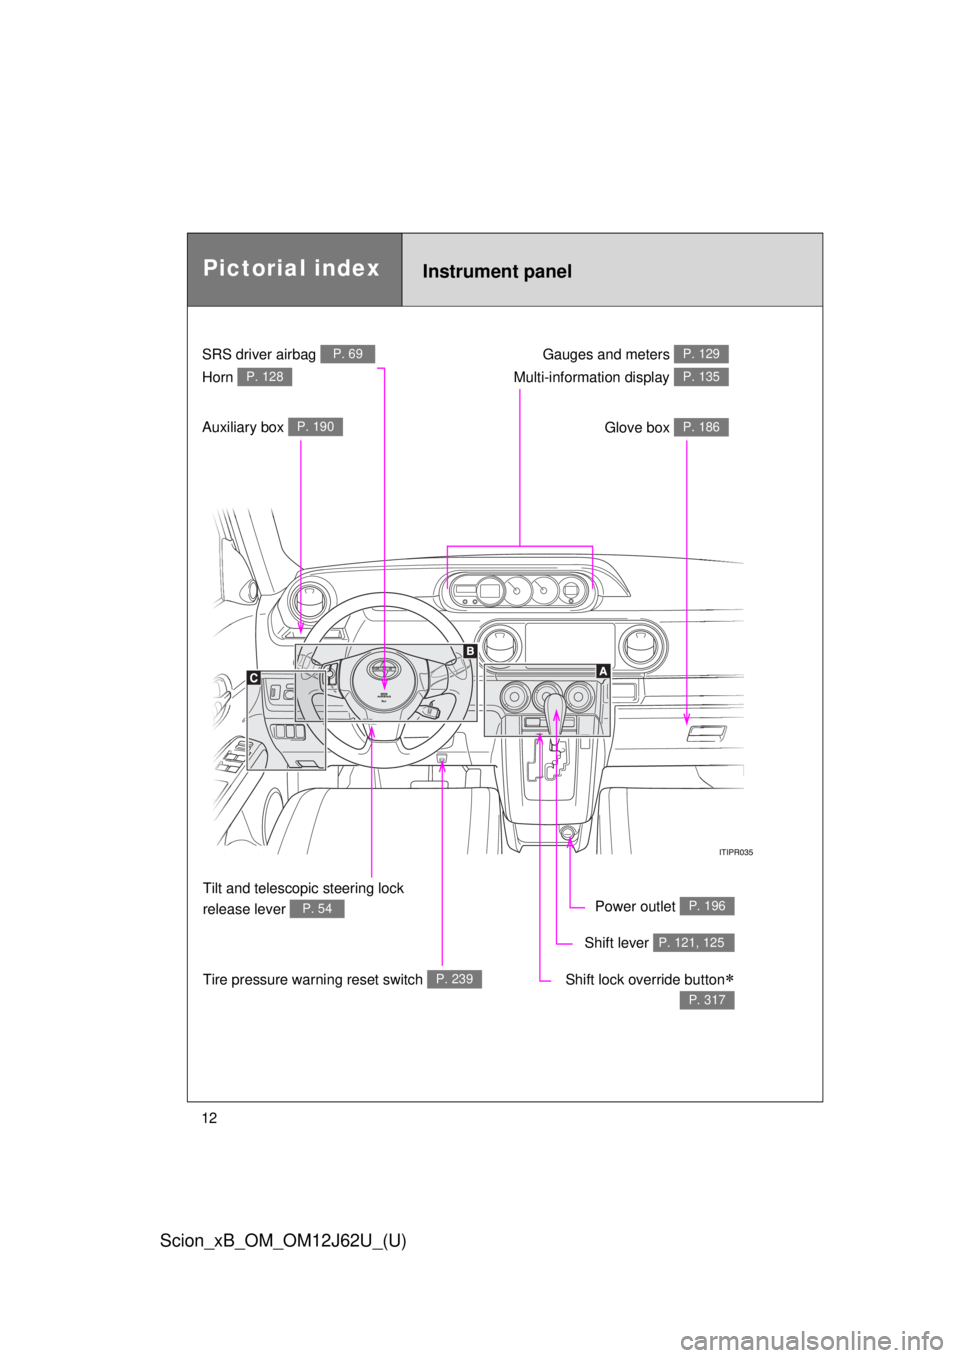 TOYOTA xB 2014  Owners Manual (in English) 12
Scion_xB_OM_OM12J62U_(U)
Gauges and meters P. 129
Glove box P. 186
Power outlet P. 196
Shift lever P. 121, 125
Shift lock override button
P. 317
SRS driver airbag P. 69
Horn P. 128
Tilt and tele